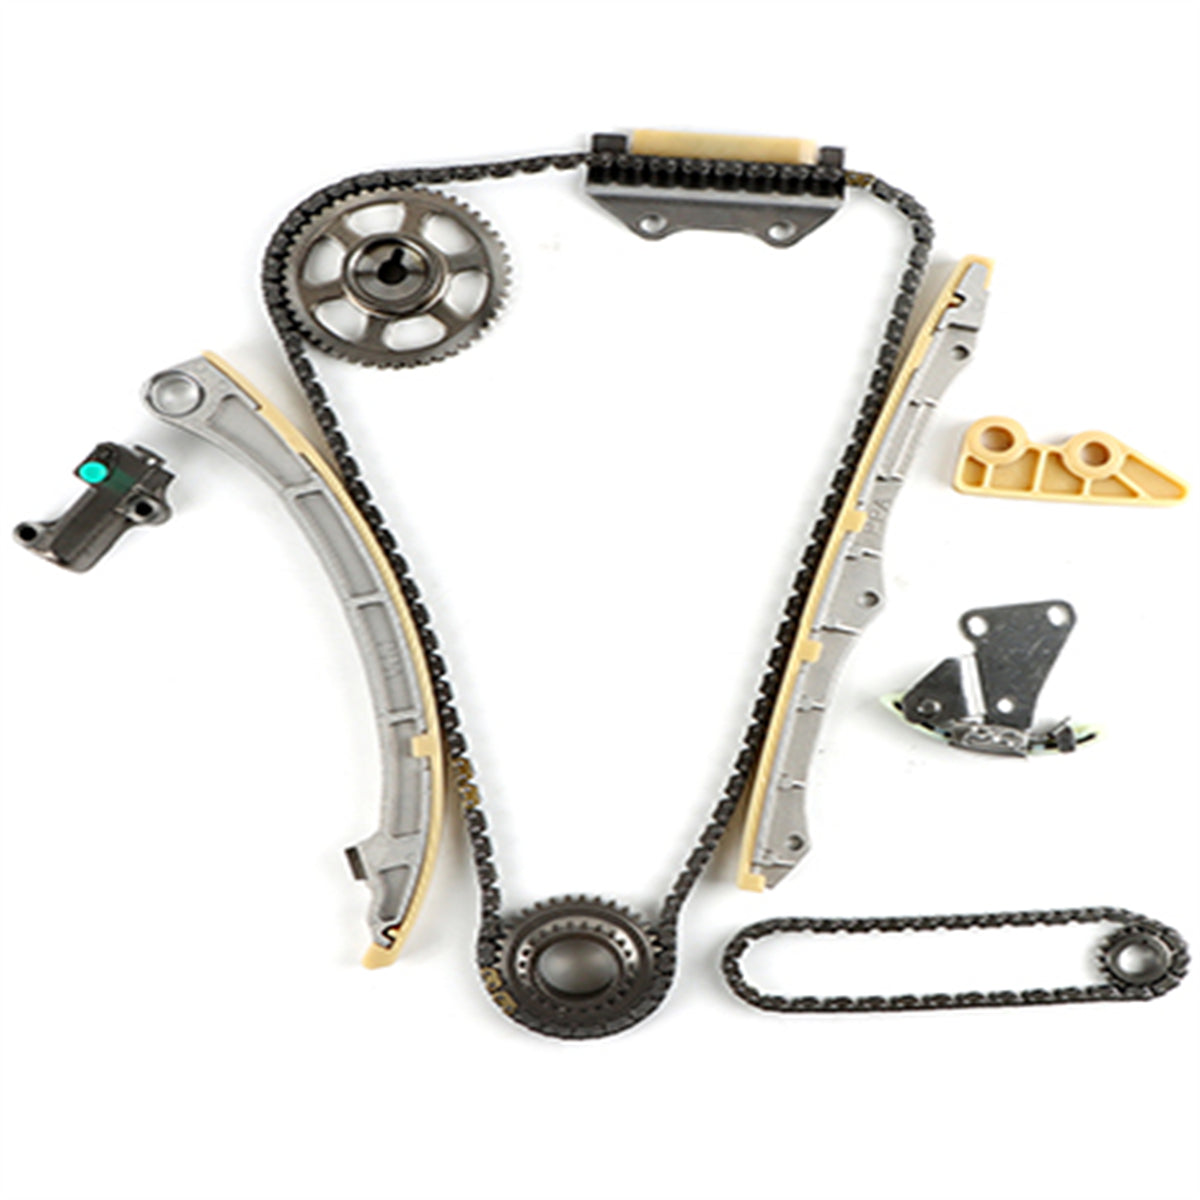 Daysyore Timing Chain Kit,Timing Chain Kit for 2003 to 2011, Timing Chain Kit Honda Accord/CR-V/Element,Auto Timing Chain Kit